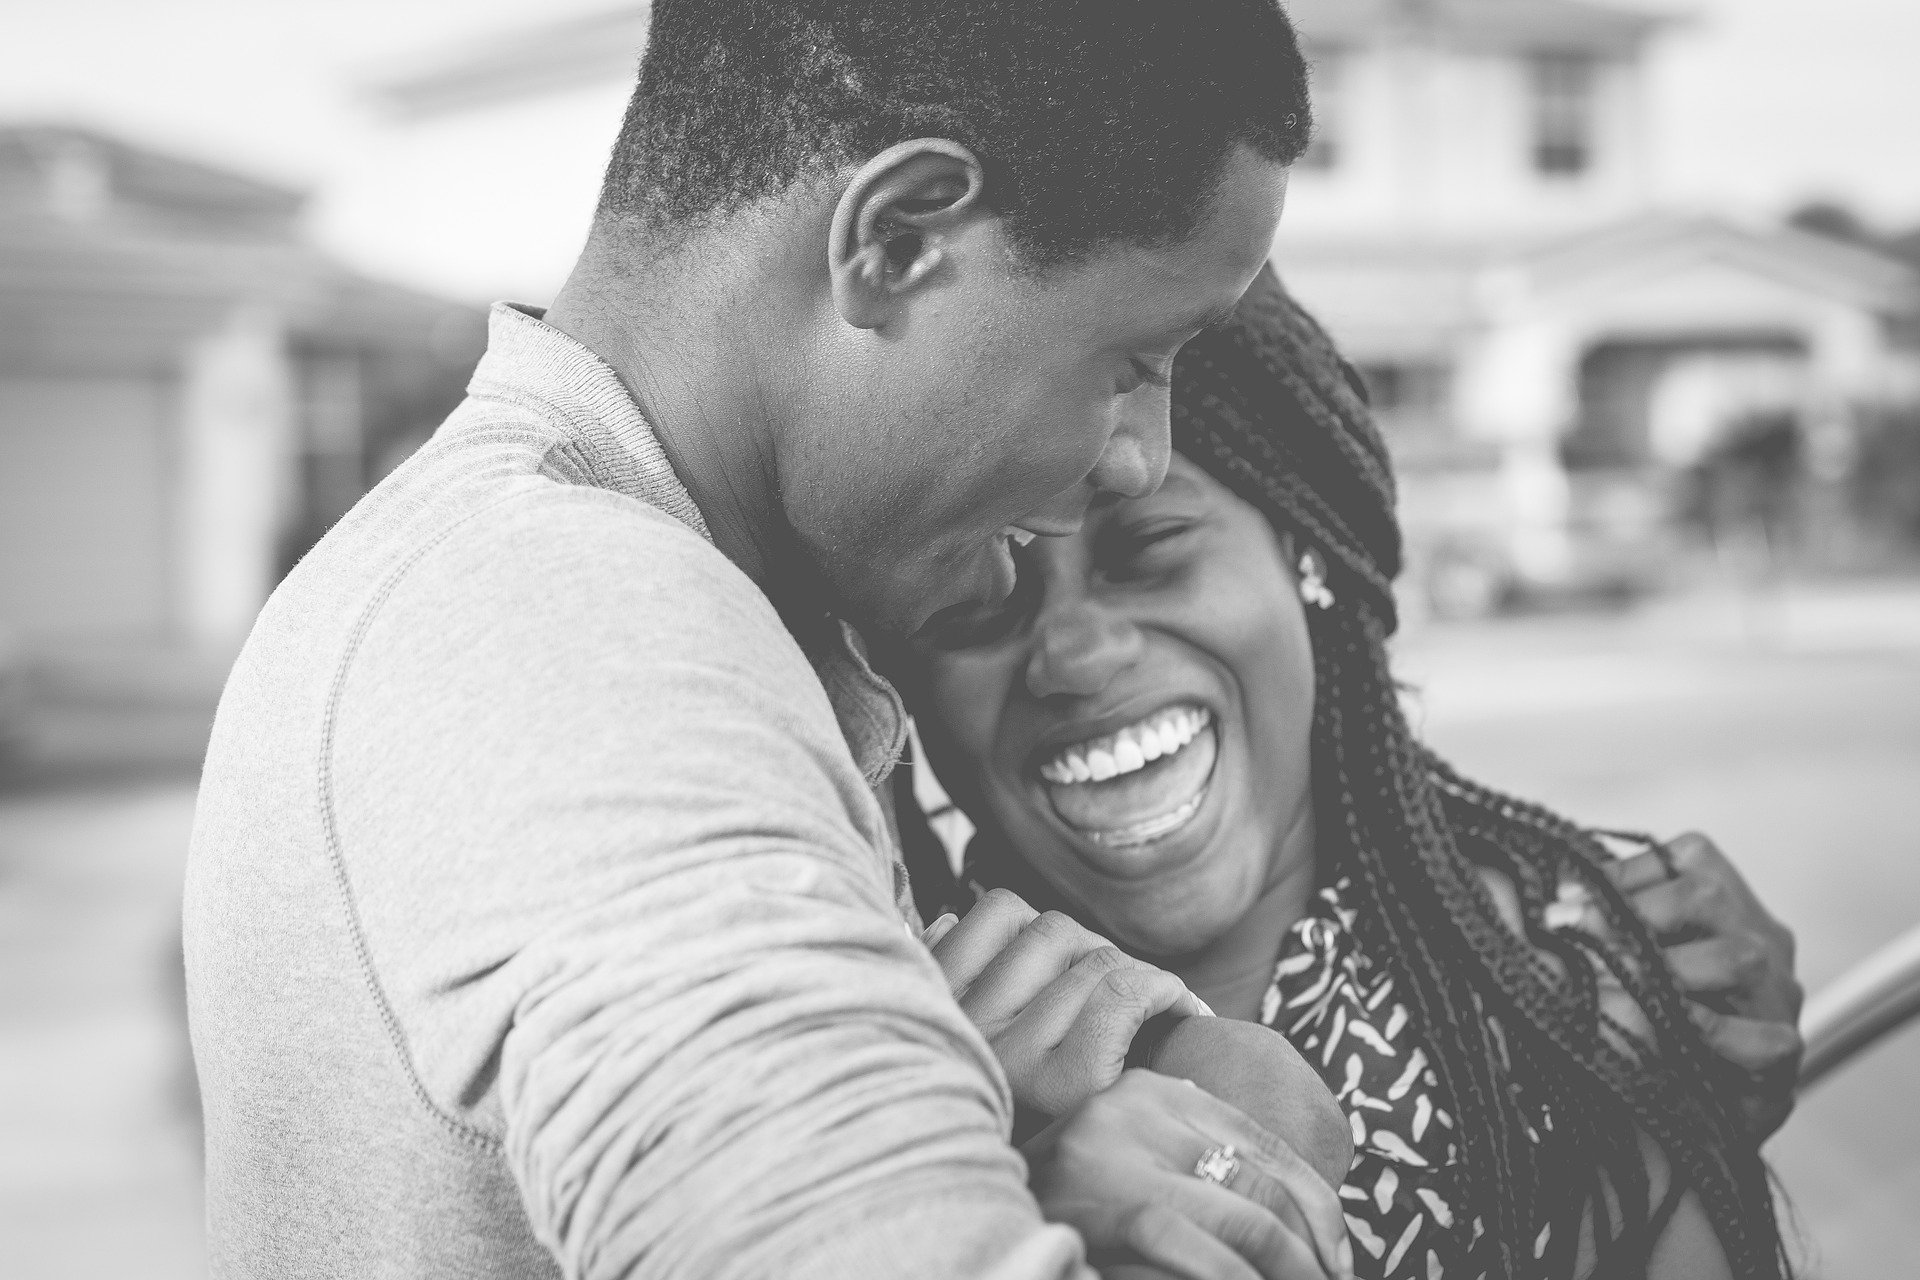 Black couple laughing in bw photo.